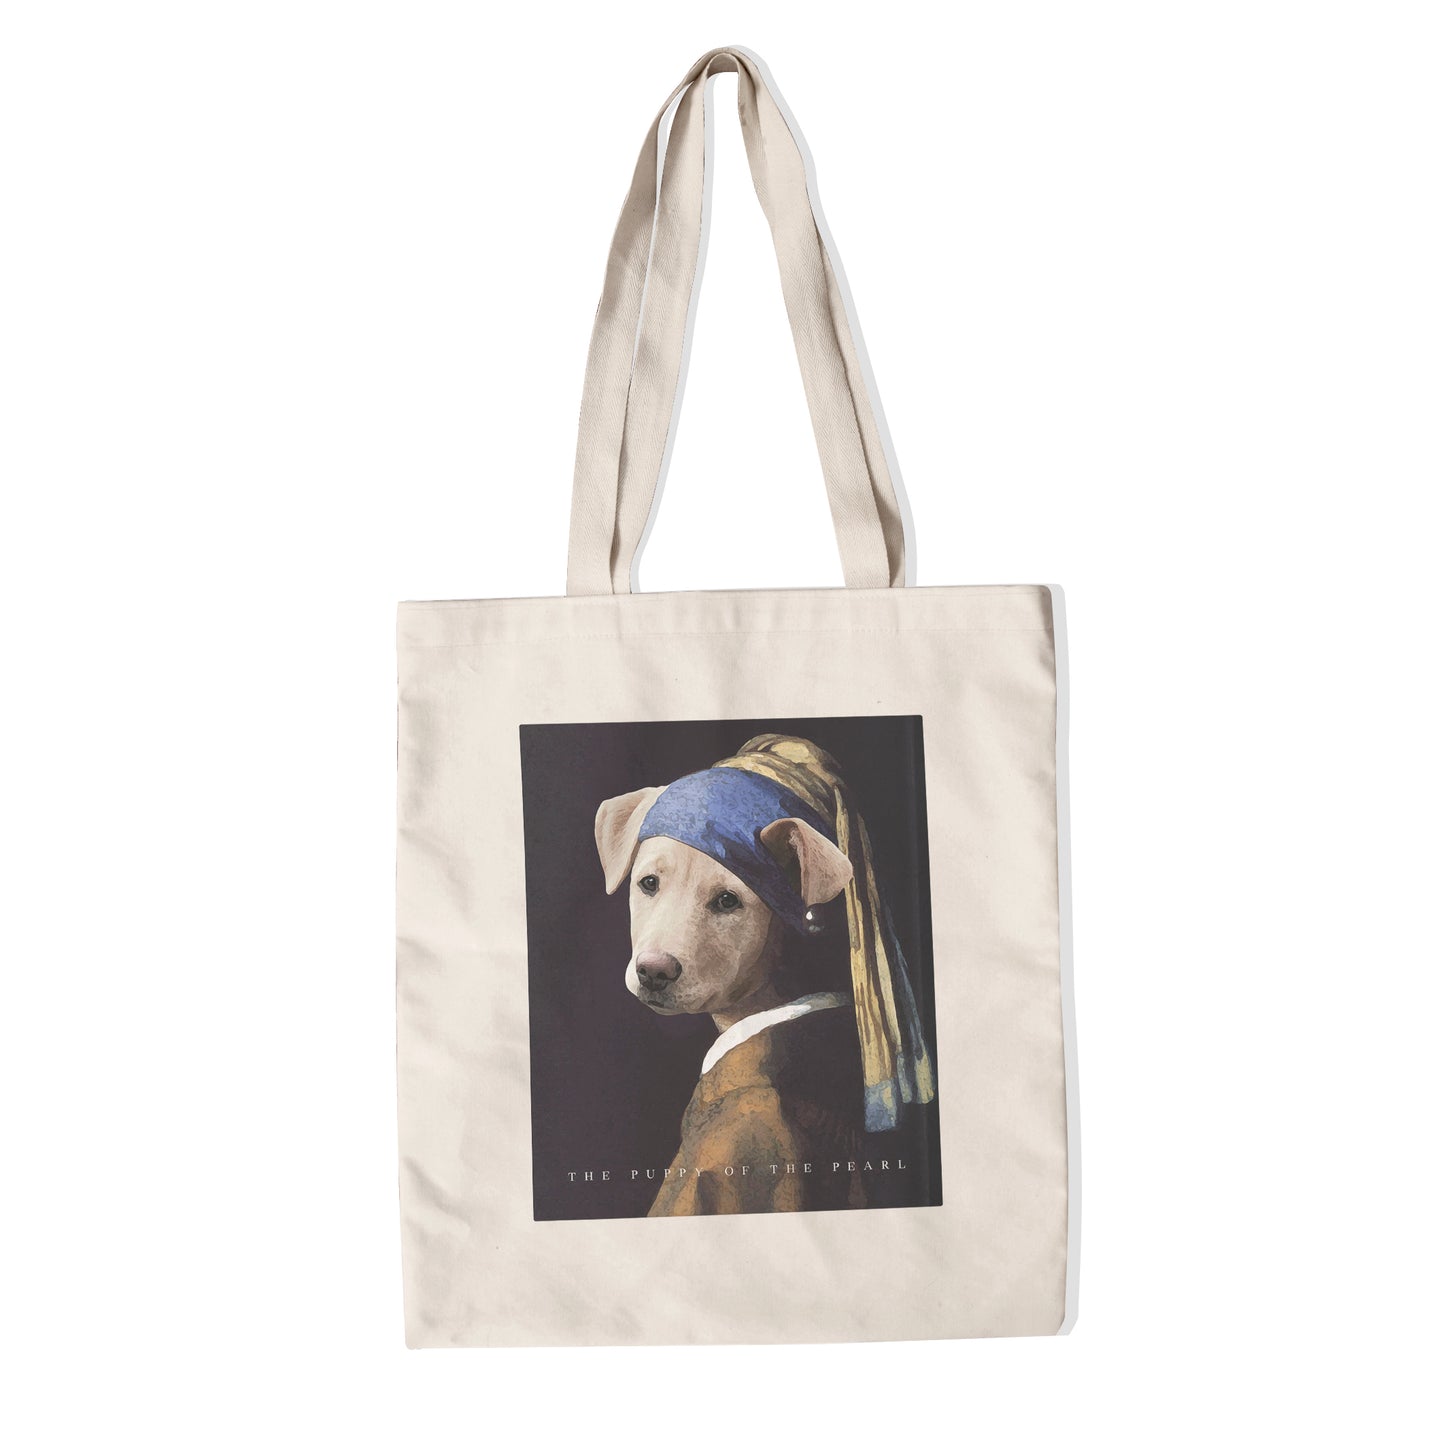 Puppy of the Pearl tote bag